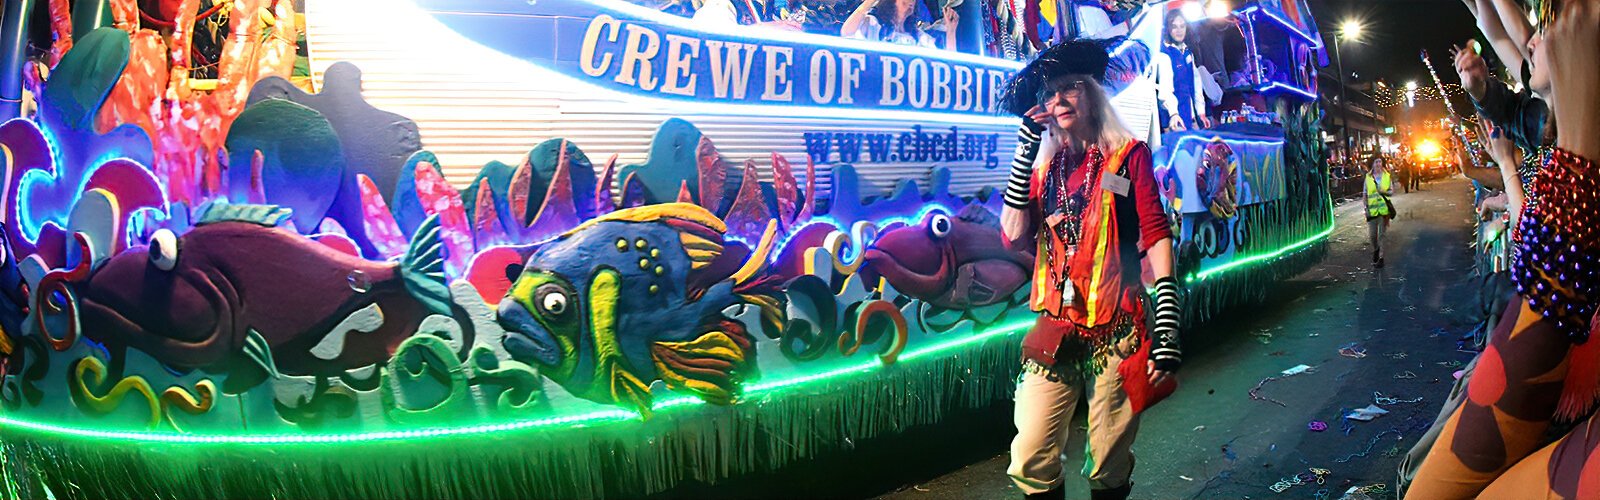 The Crewe of Bobbie C. Davis, “The Sailingest Crewe,” takes part in the Sant’ Yago Knight Parade, voted one of the top ten parades in the Southeast by Suncoast Magazine.